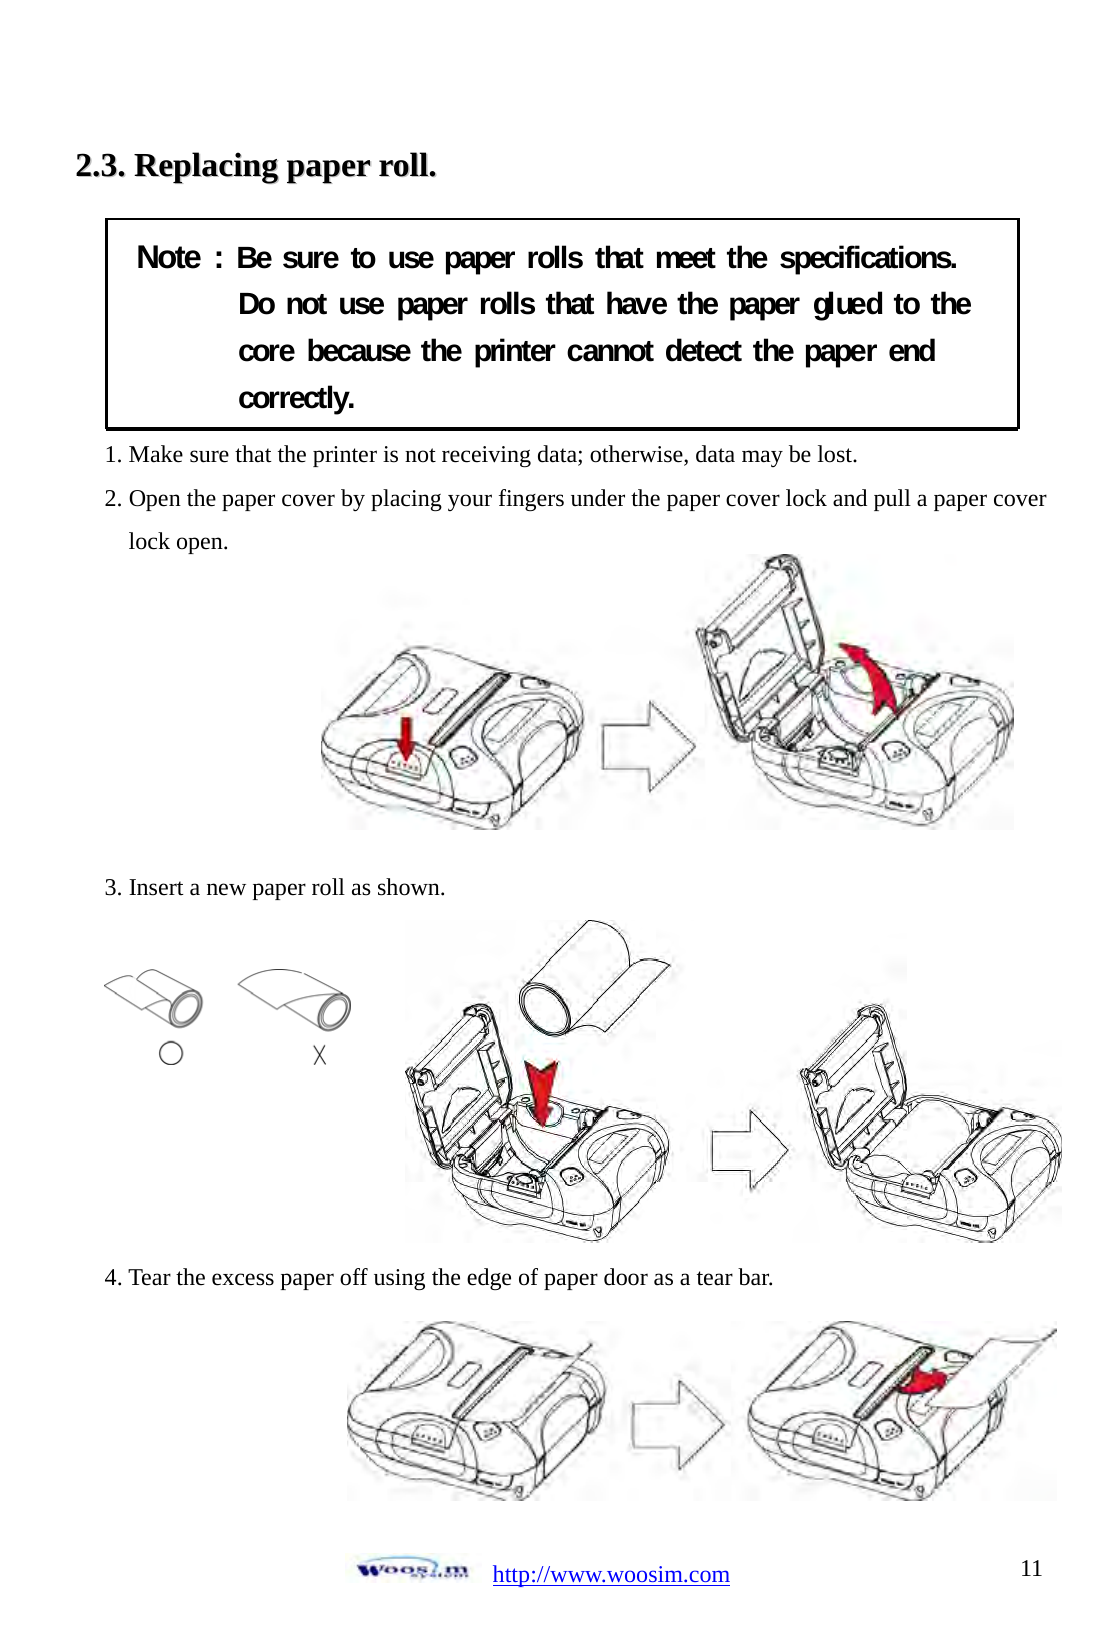  http://www.woosim.com 1122..33..  RReeppllaacciinngg  ppaappeerr  rroollll..                                Note : Be sure to use paper rolls that meet the specifications.Do not use paper rolls that have the paper glued to thecore because the printer cannot detect the paper endcorrectly.  1. Make sure that the printer is not receiving data; otherwise, data may be lost. 2. Open the paper cover by placing your fingers under the paper cover lock and pull a paper cover lock open.         3. Insert a new paper roll as shown.         4. Tear the excess paper off using the edge of paper door as a tear bar.    